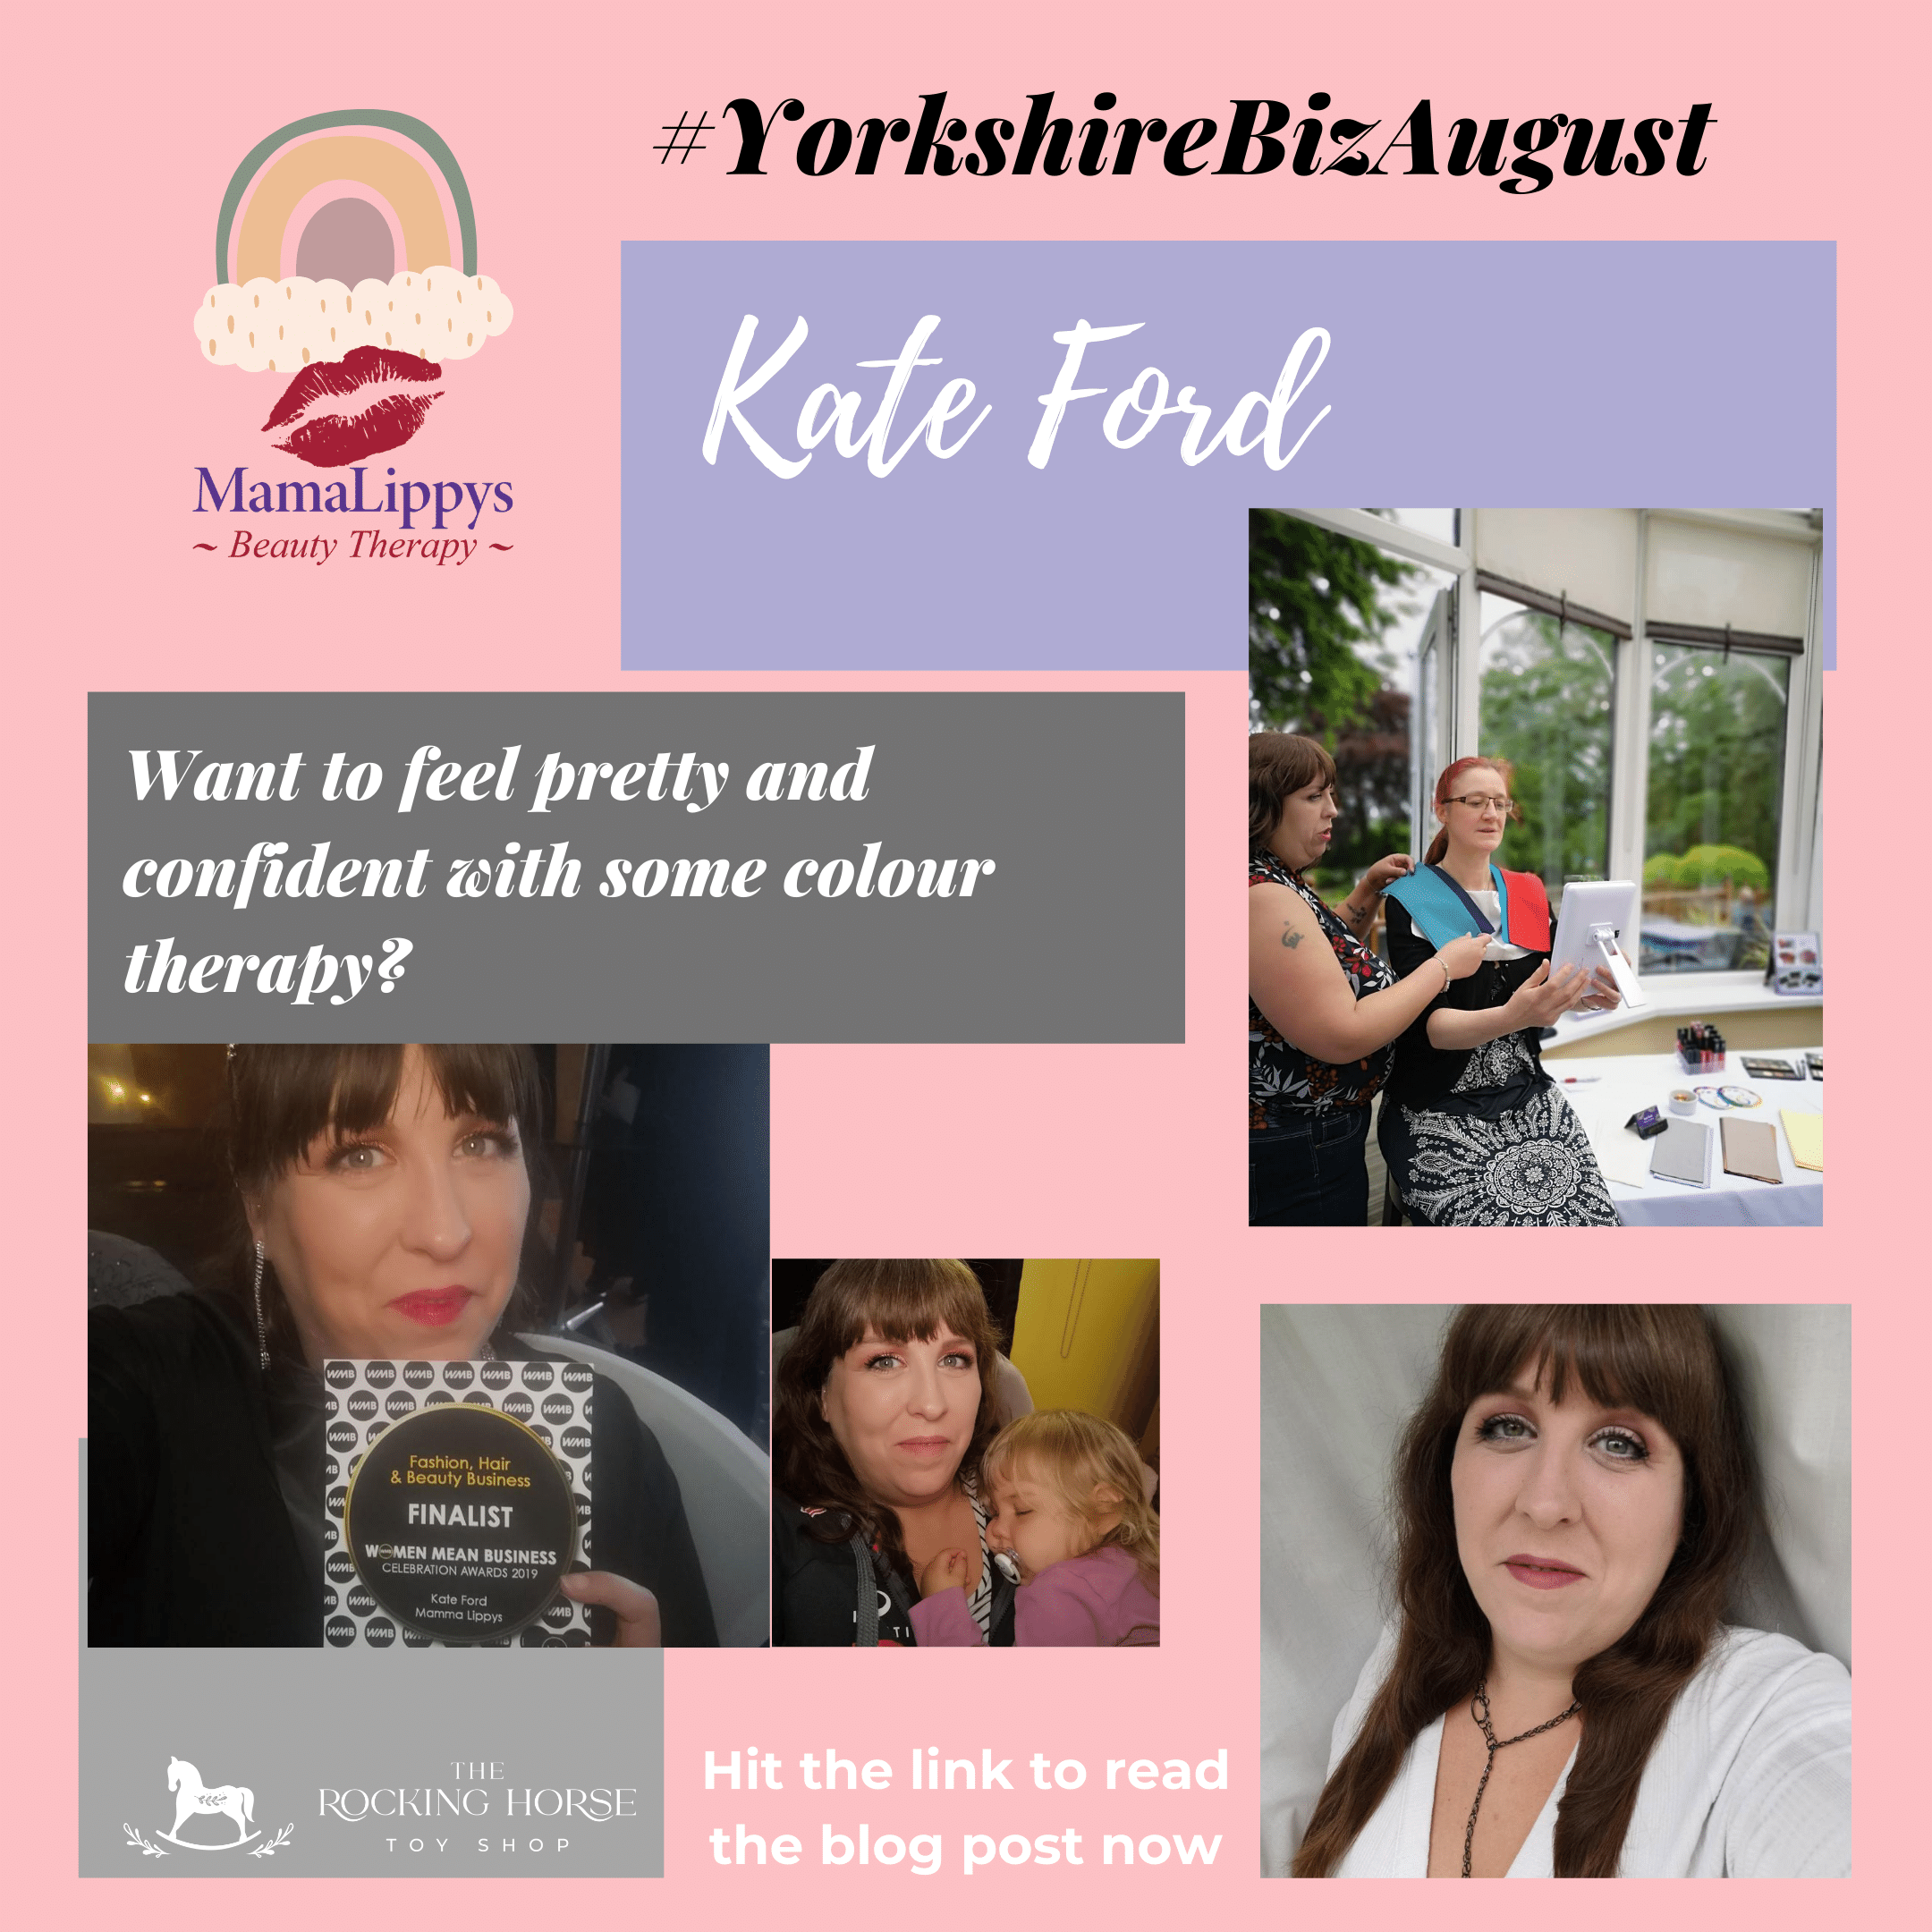 Yorkshire Biz August 18 - Kate Ford - MamaLippys Beauty Therapy